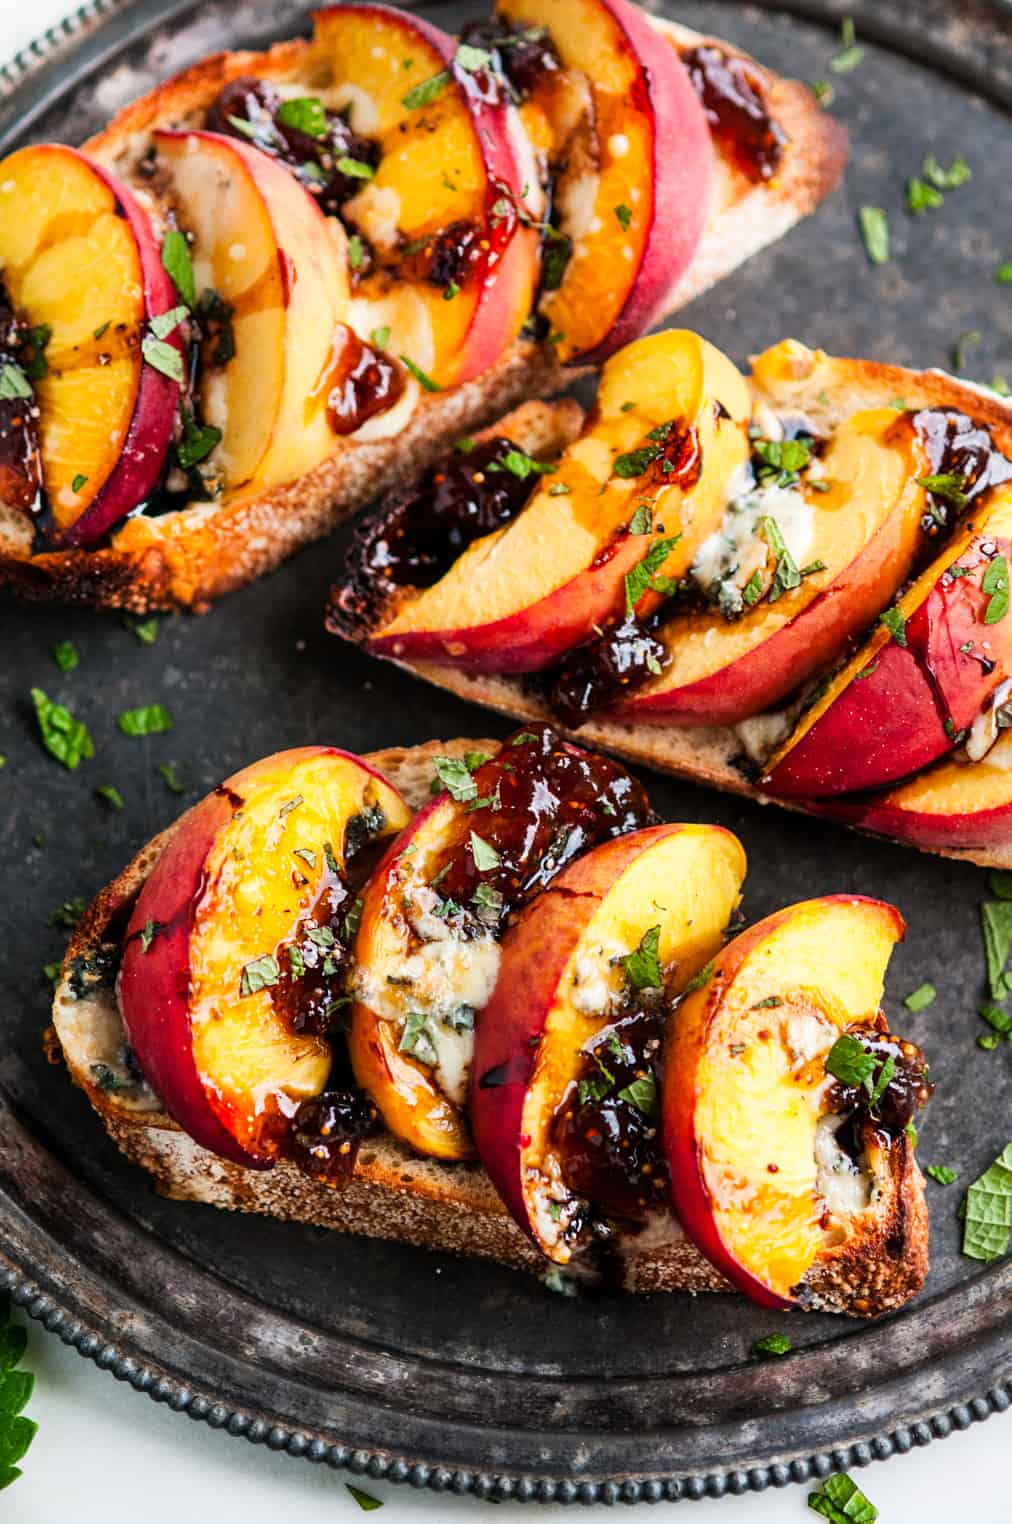 Baked Balsamic Peach Breakfast Toast with Blue Cheese and Fig Jam | aberdeenskitchen.com